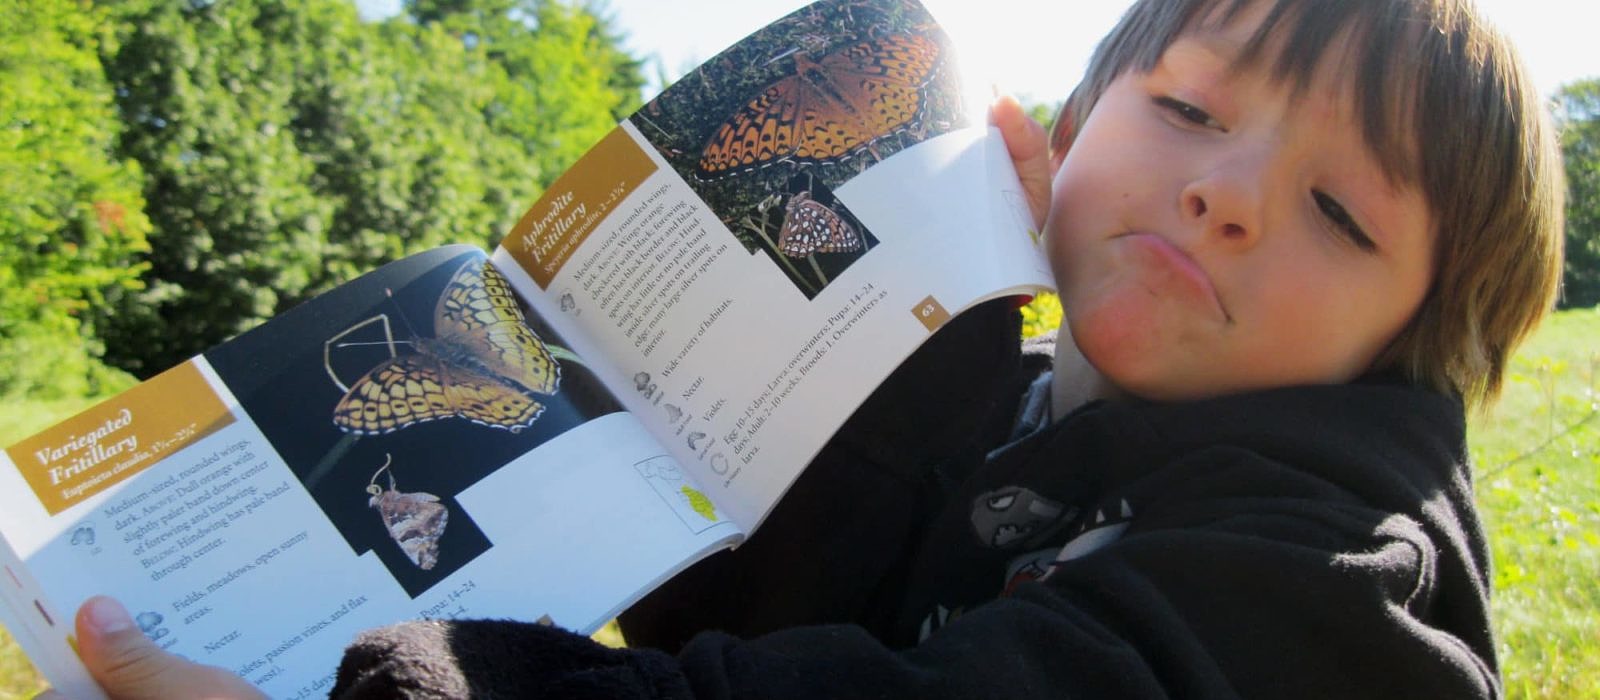 A young naturalist explores a field guide to butterflies. (photo © Cathy Carabello)